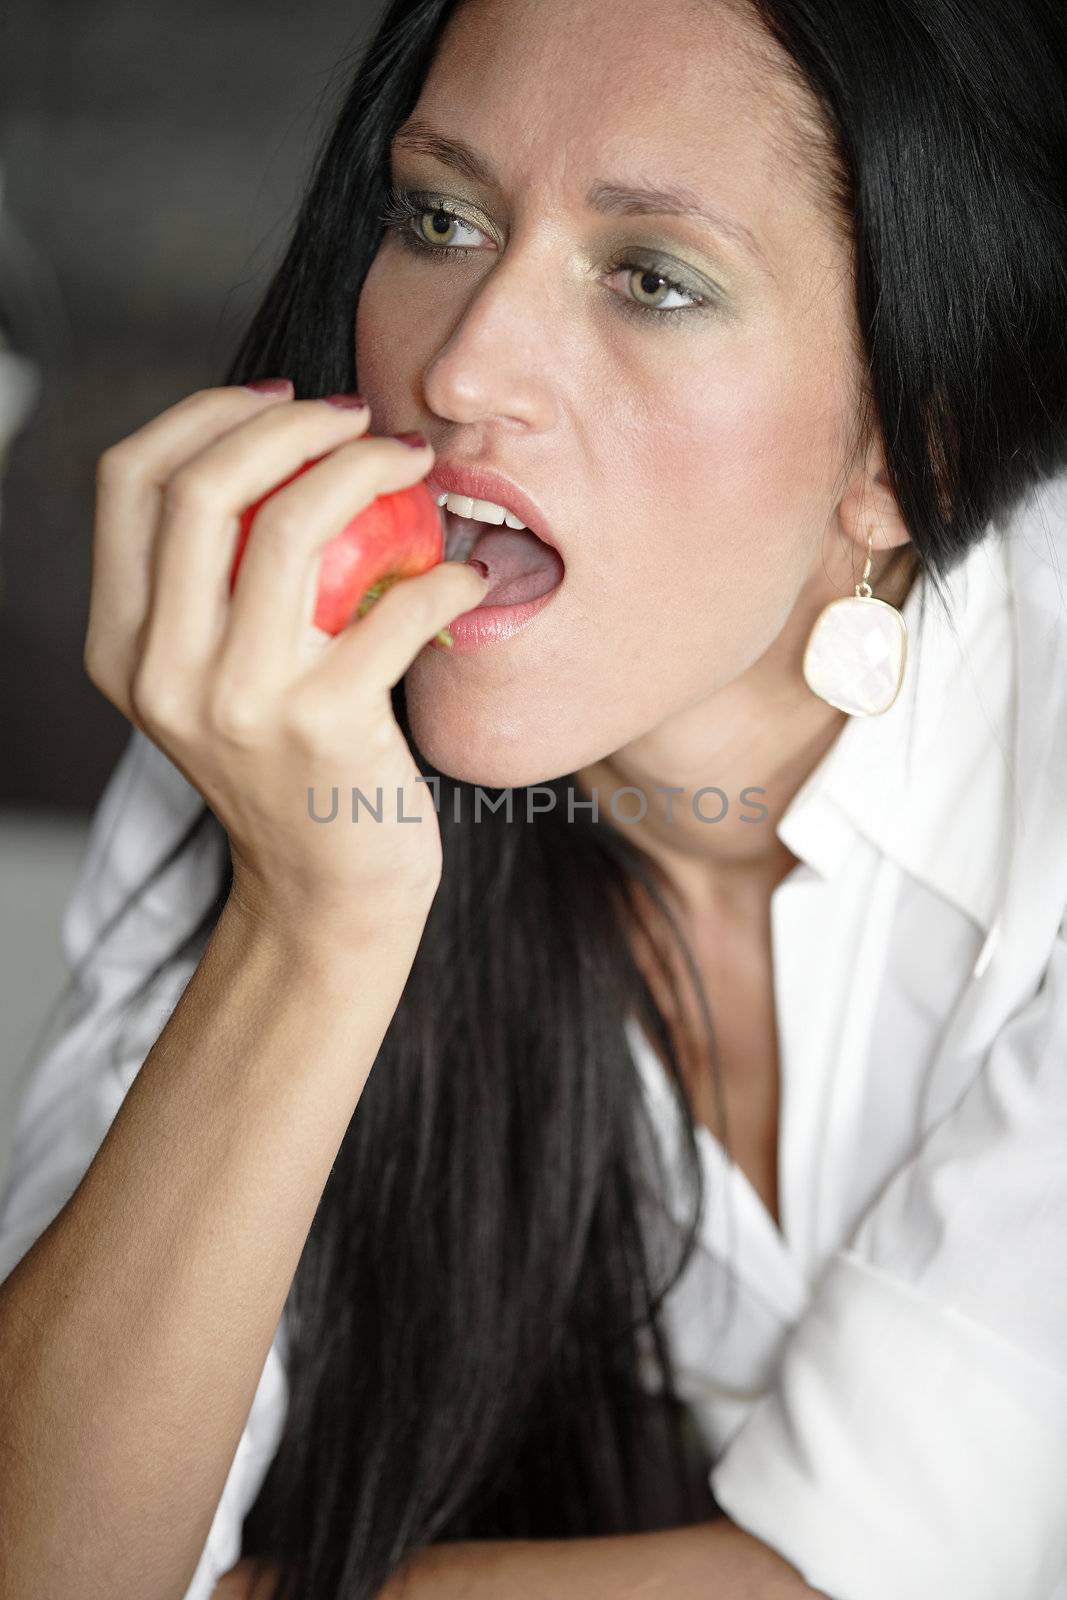 Attractive young woman eating an apple.